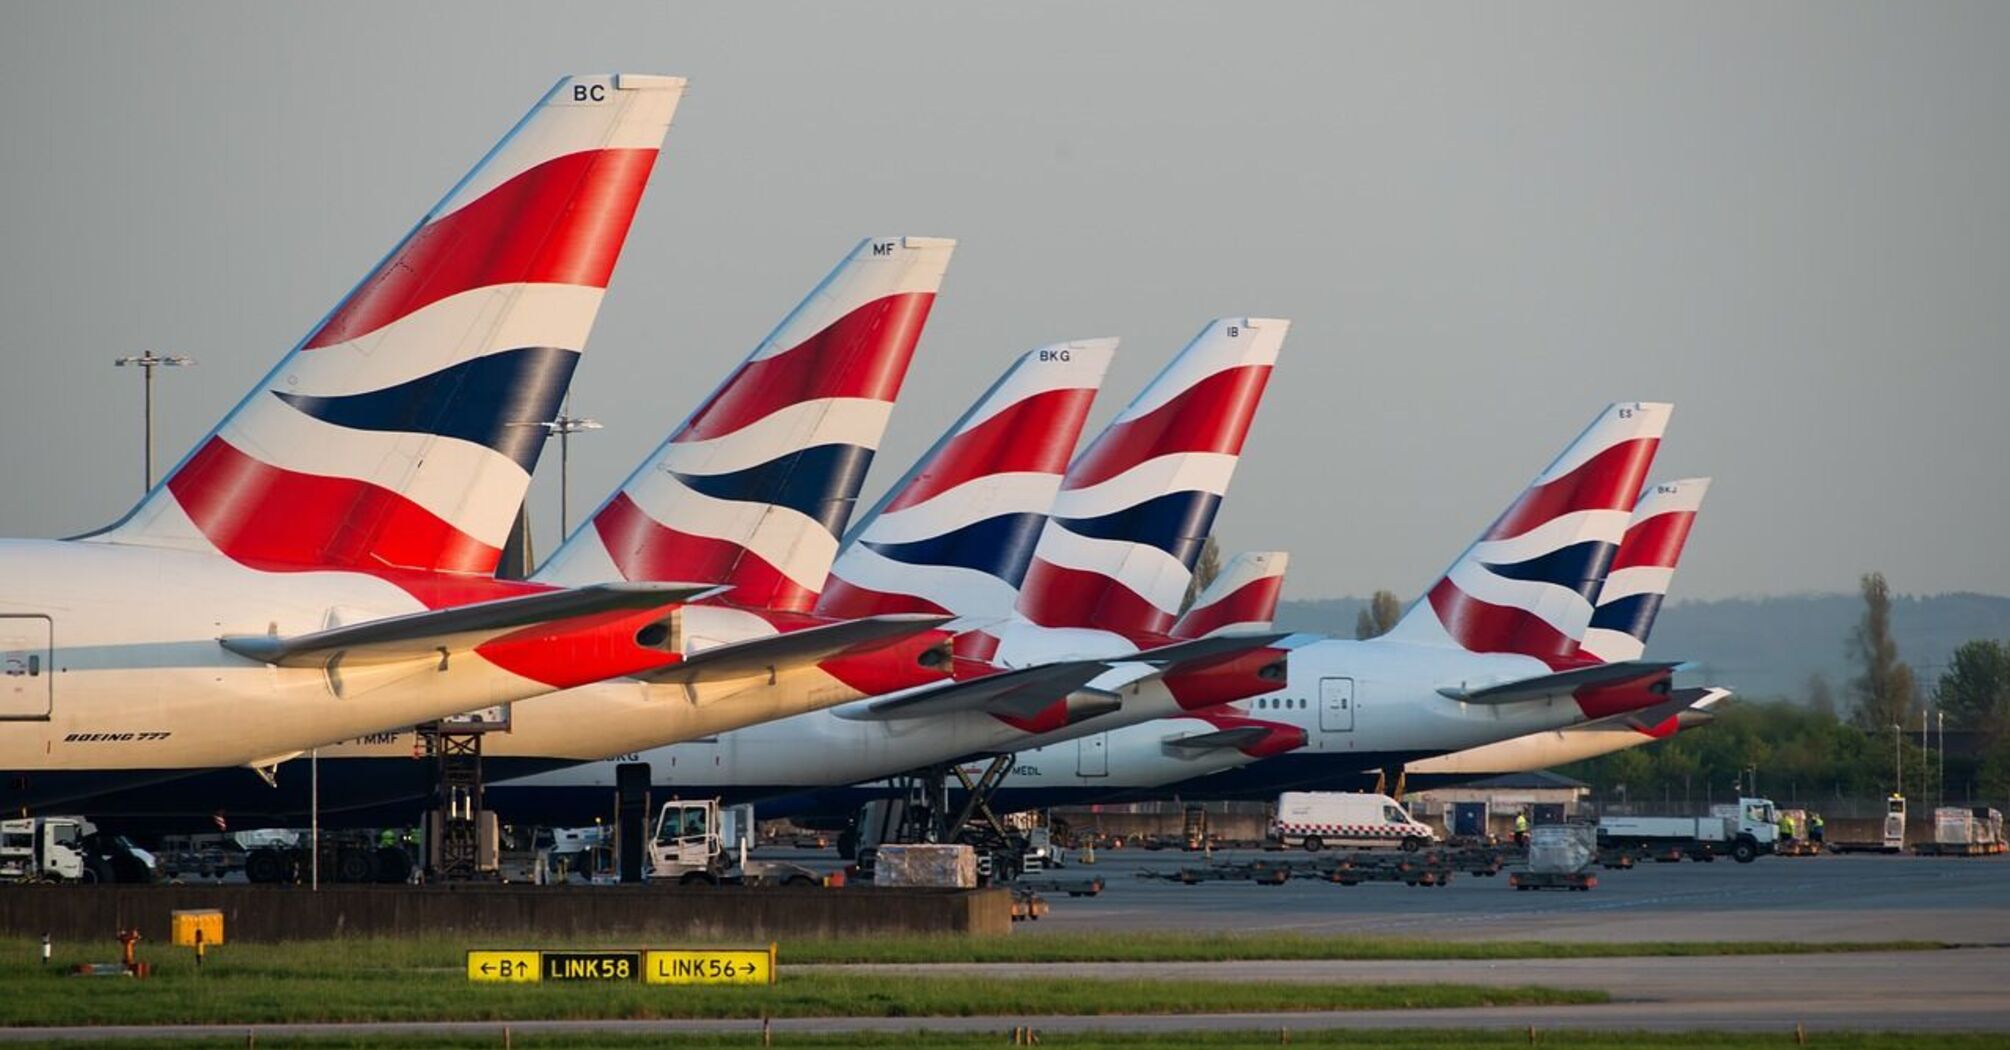 Top 10 UK airlines: which British carriers were the best in terms of reliability, price, comfort, reputation and other criteria